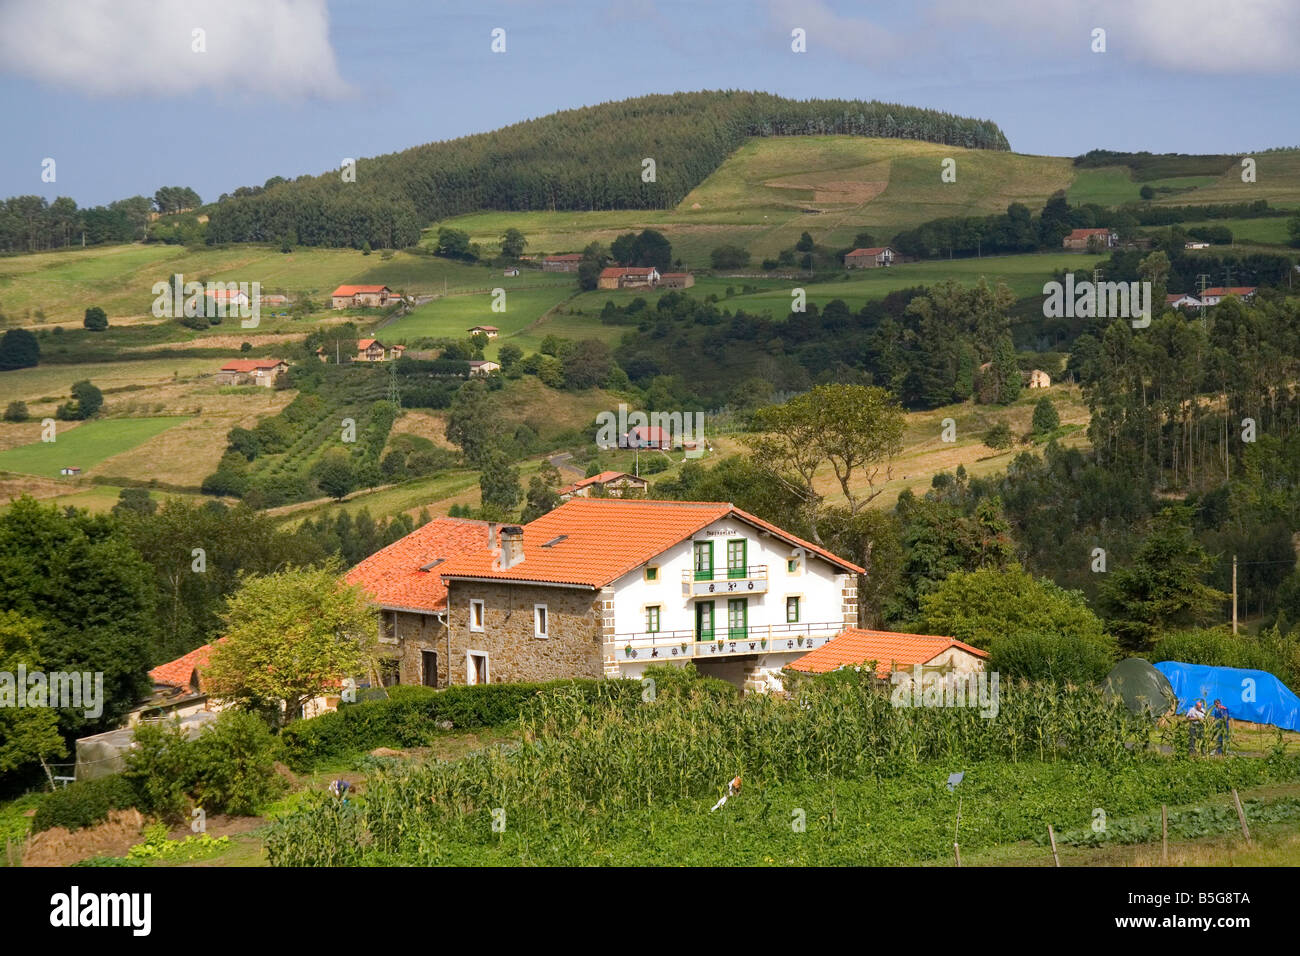 Rural housing near the town of Bermeo in the province of Biscay Basque Country Northern Spain Stock Photo